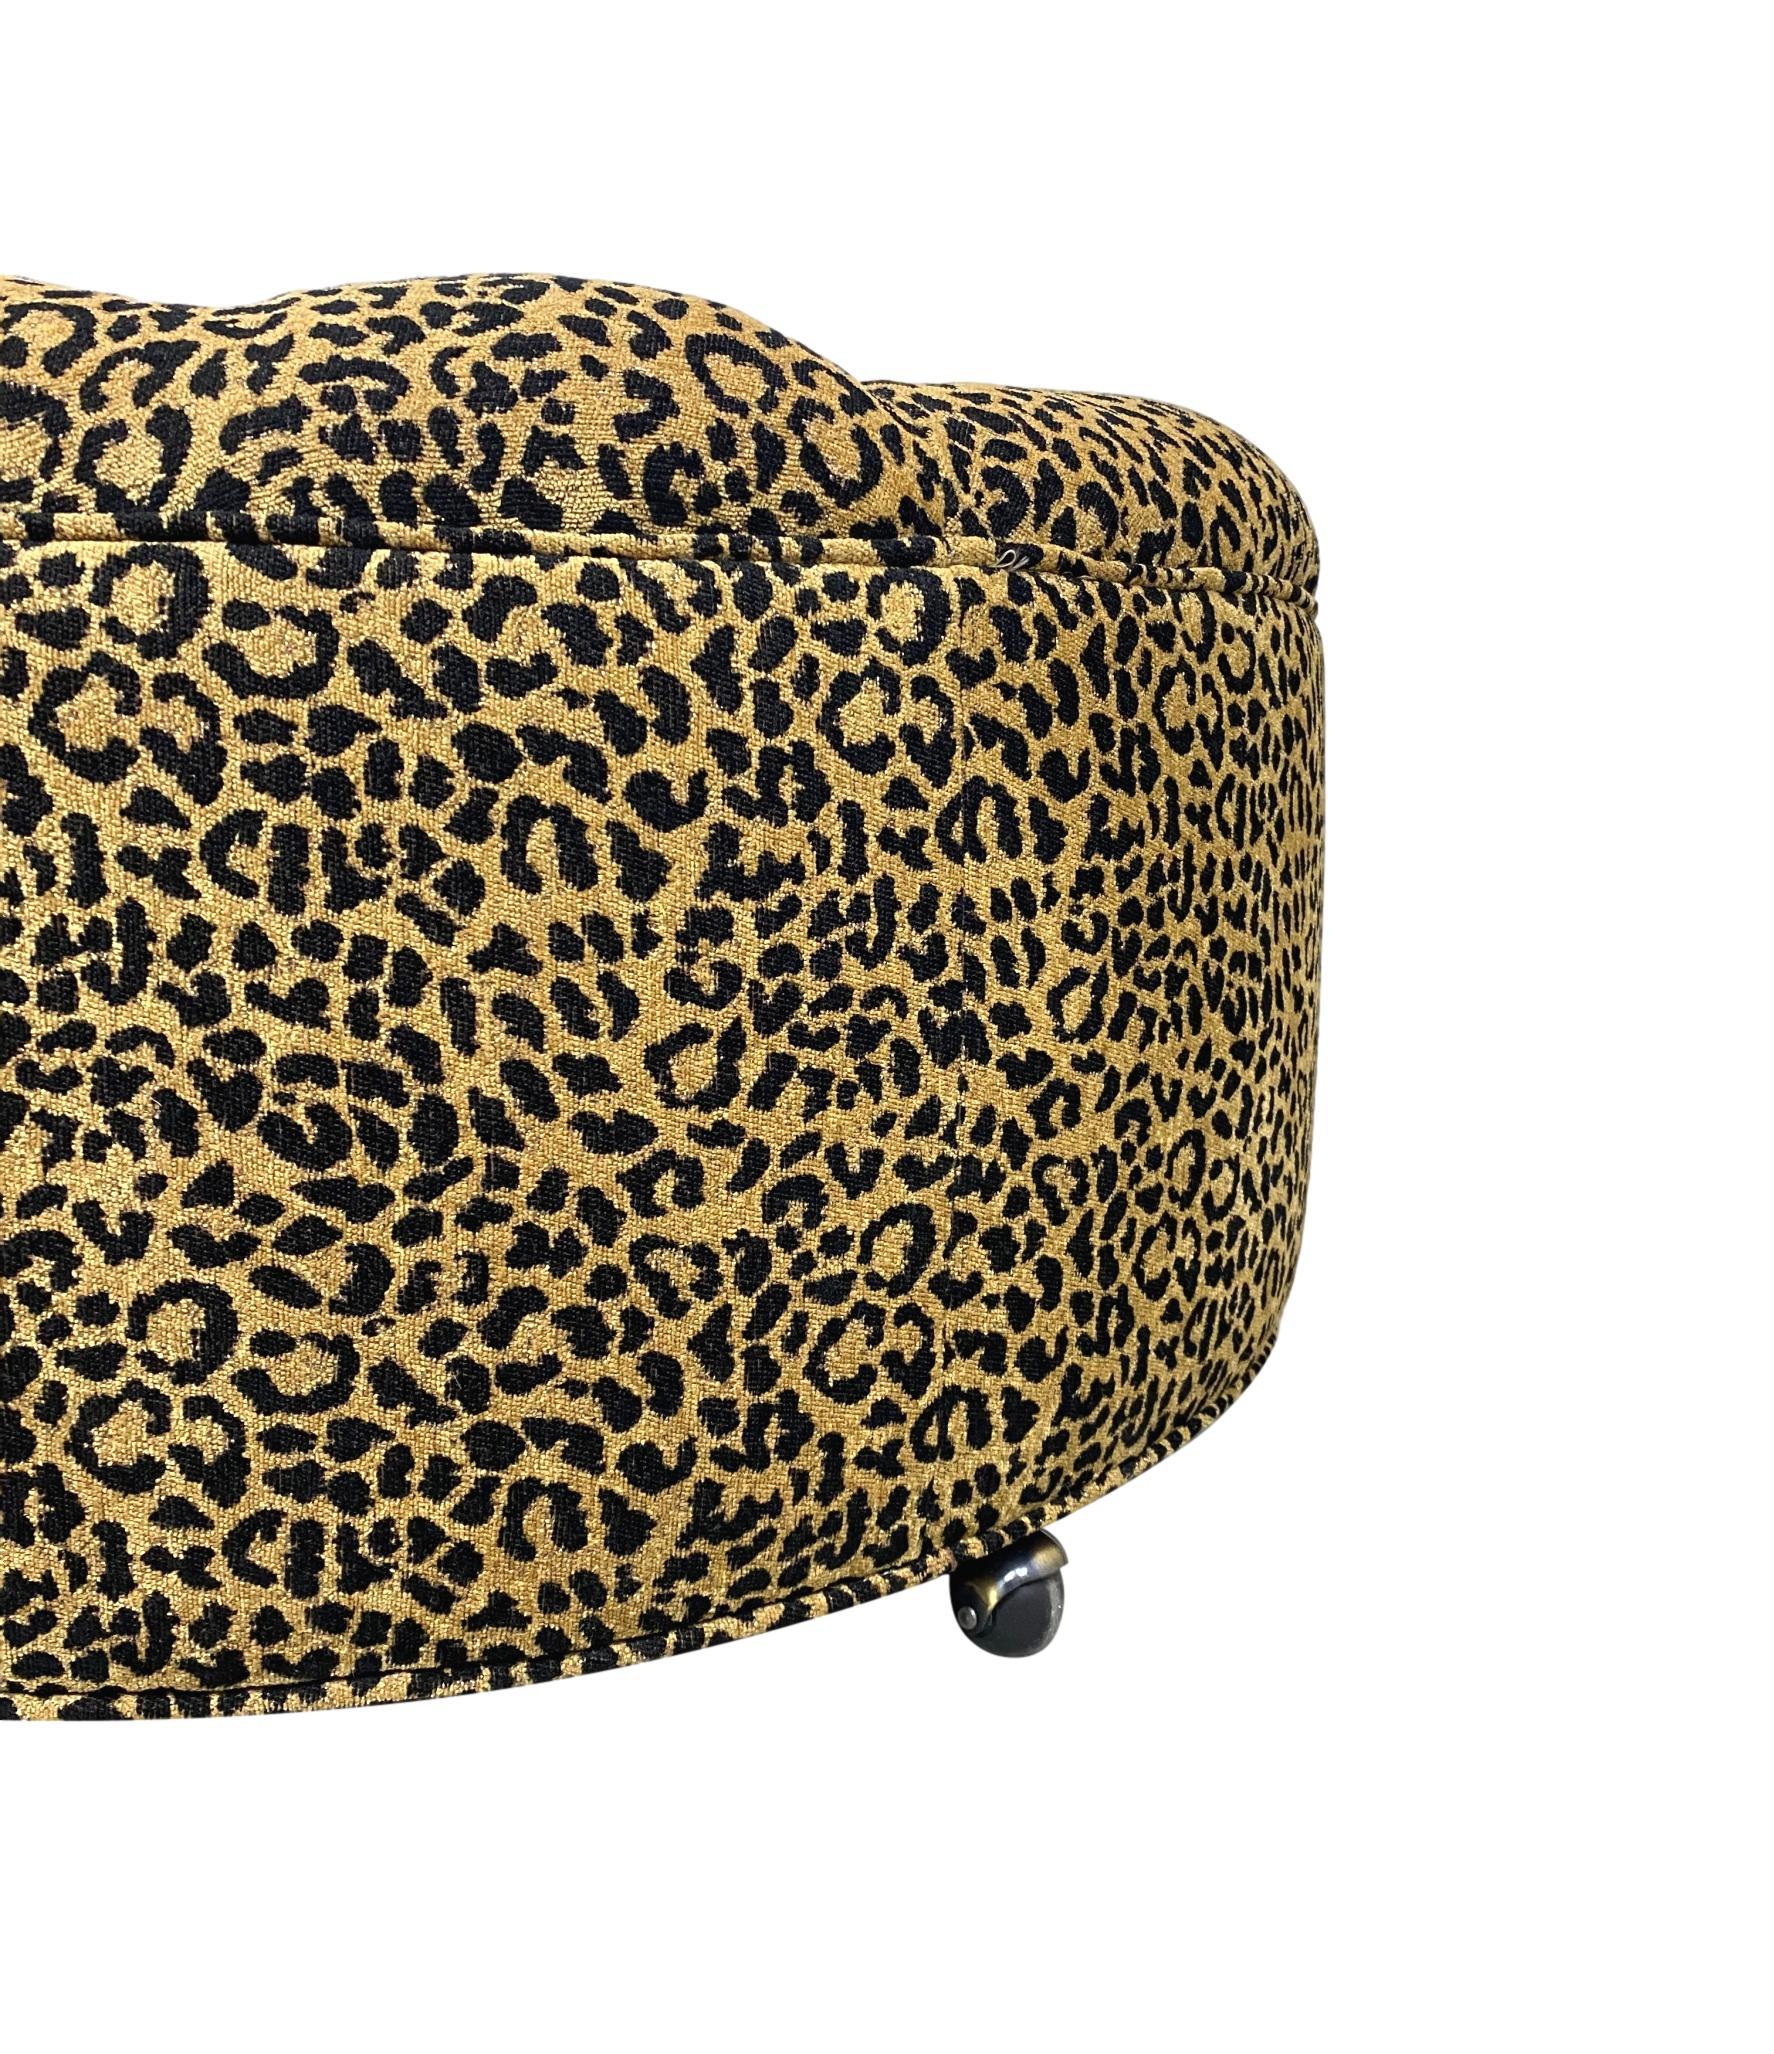 American Round Ottoman, Newly Upholstered in Designer Leopard Print Chenille For Sale